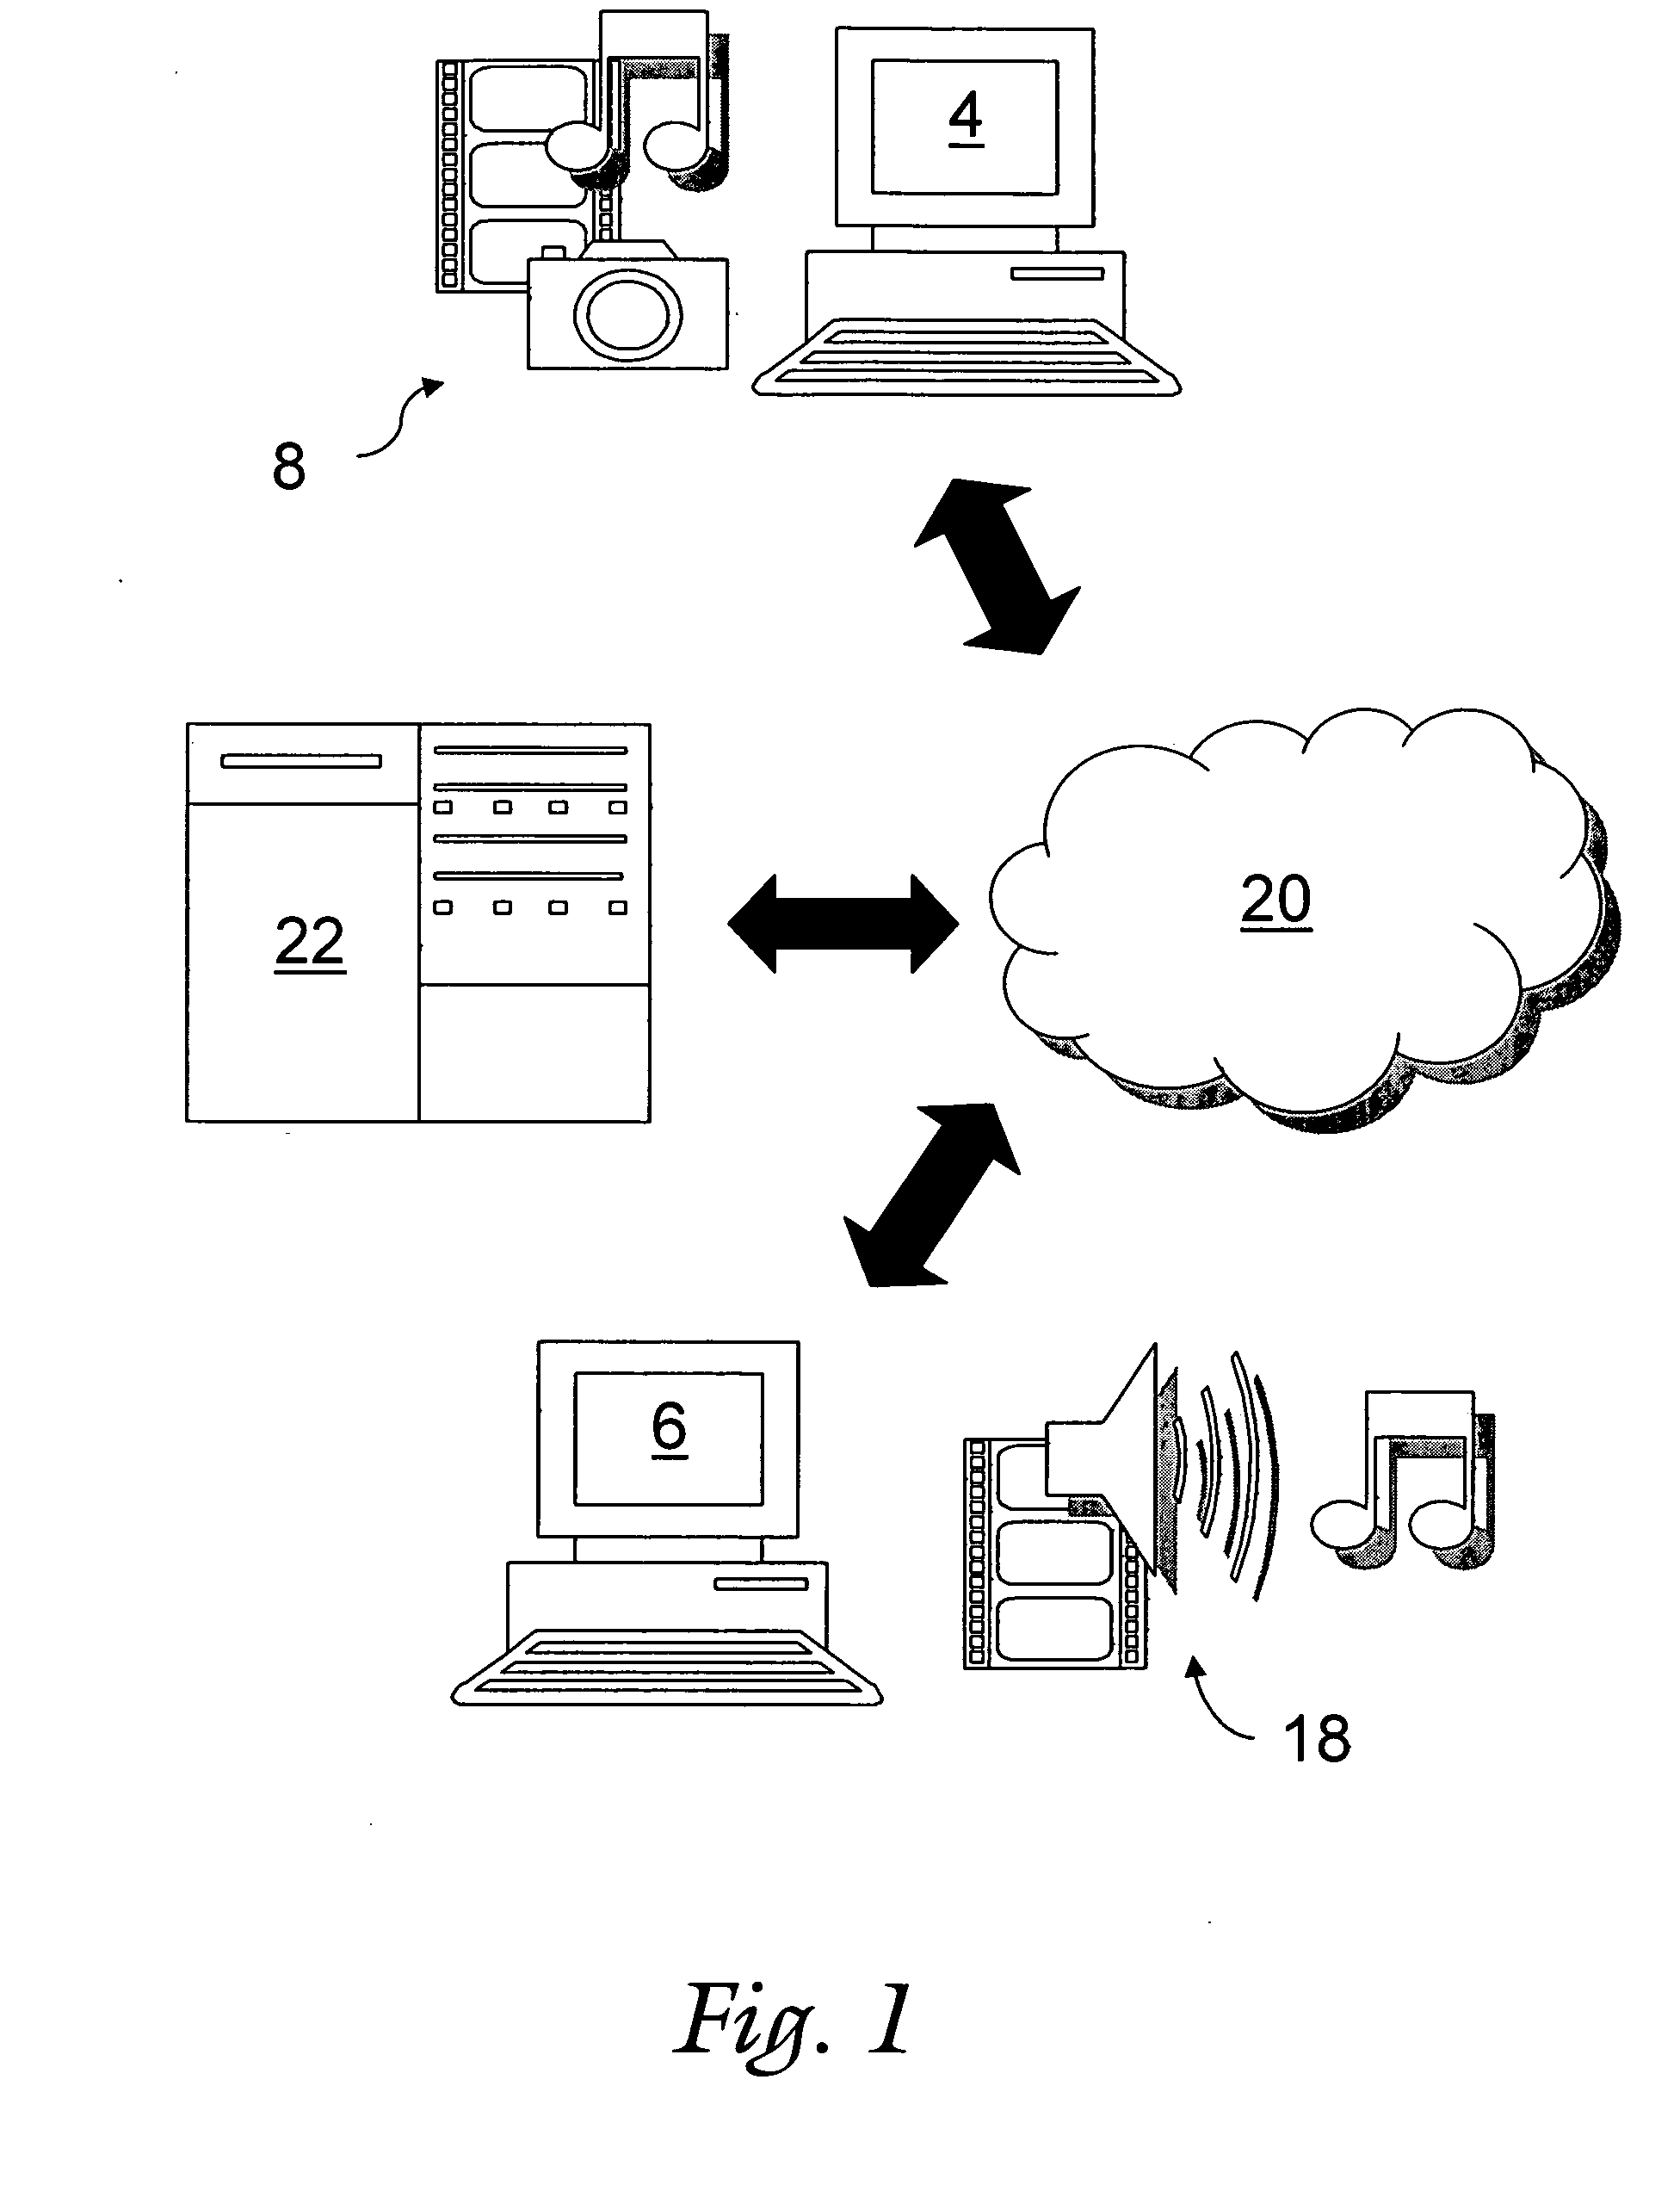 System and method for improved content delivery